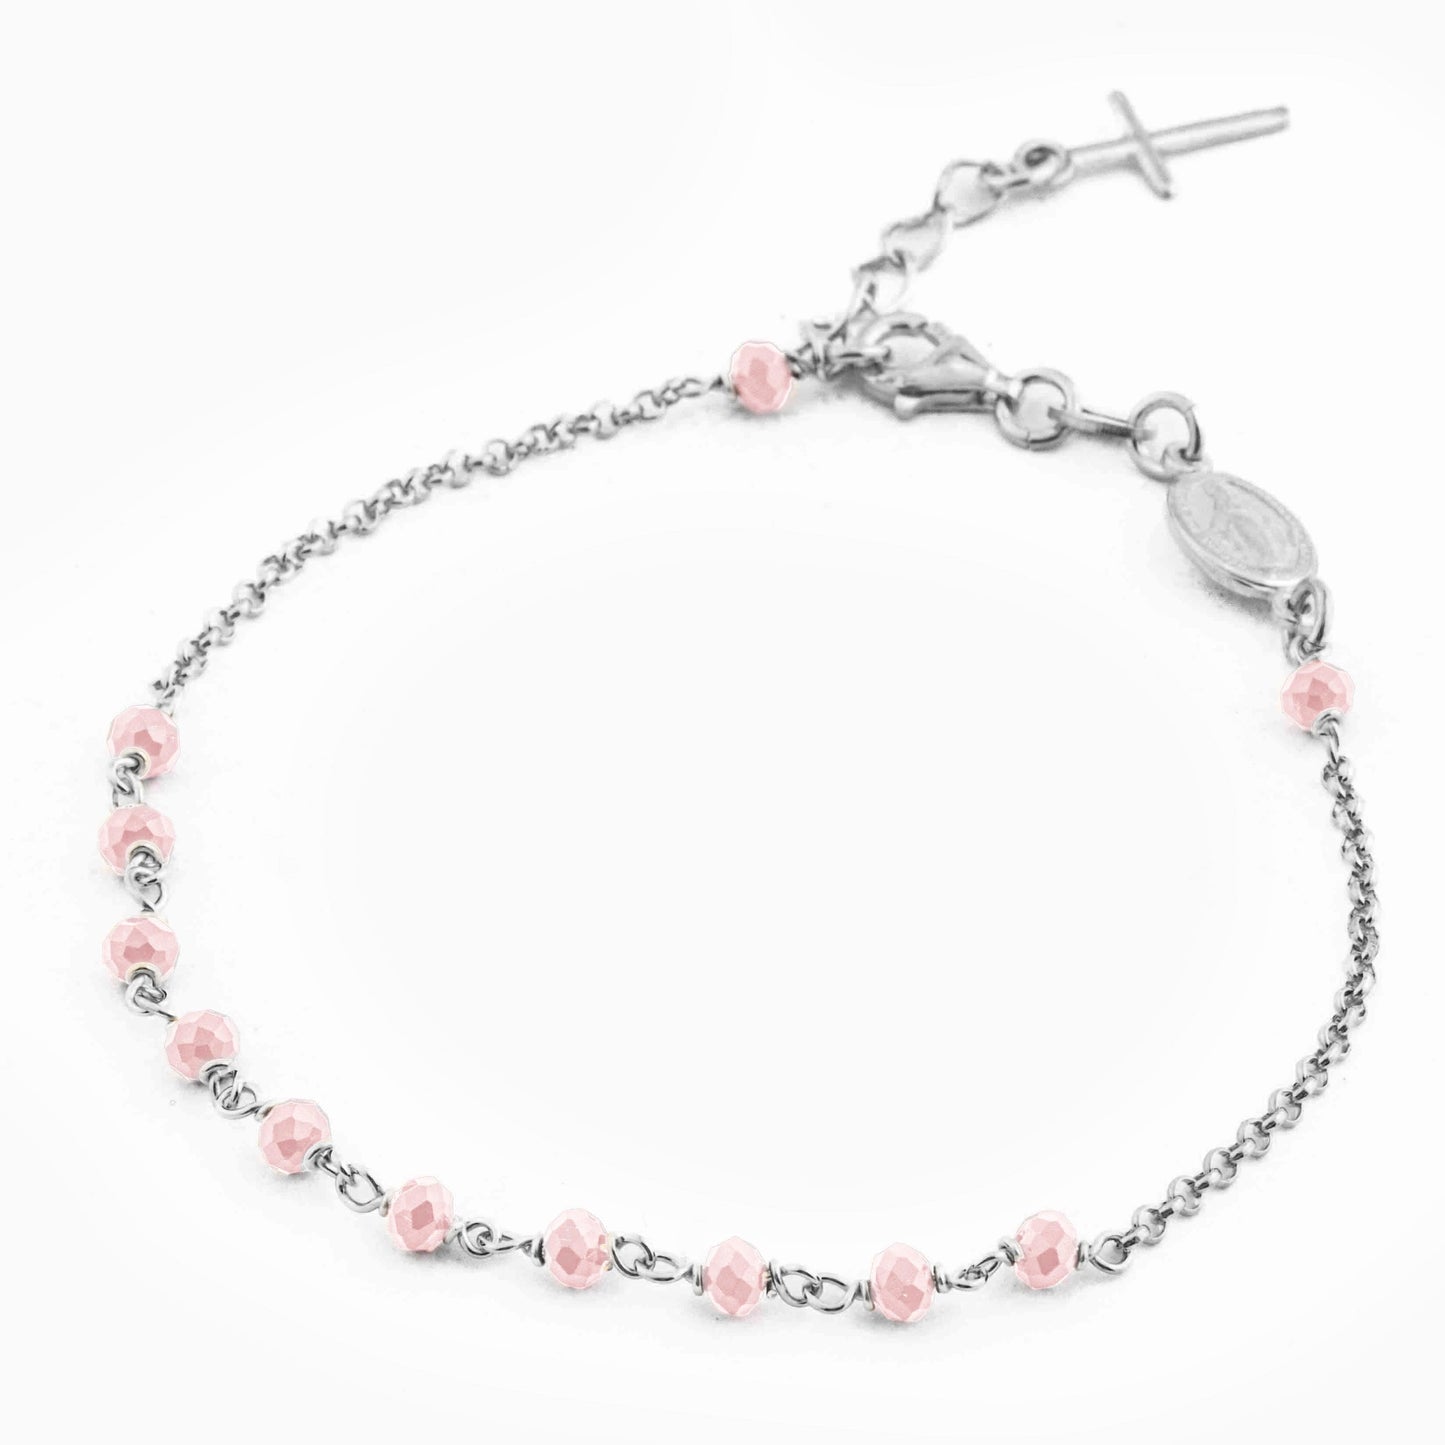 MONDO CATTOLICO Prayer Beads STERLING SILVER ROSARY BRACELET WITH MIRACULOUS MEDAL AND CROSS FACETED BEADS